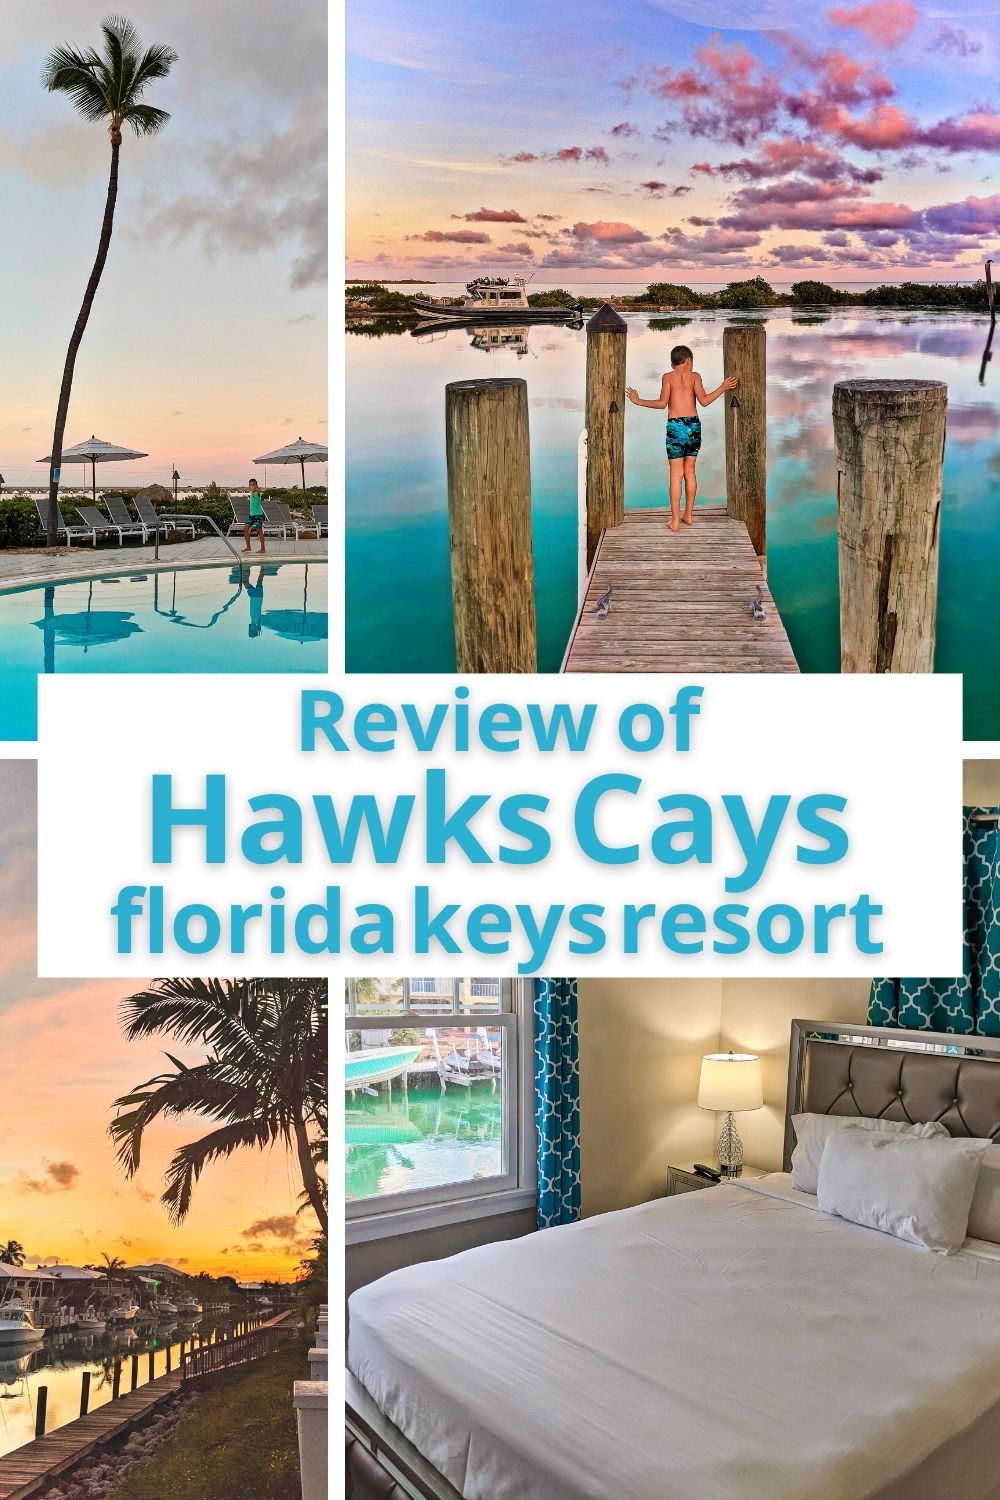 Review of Hawks Cay Resort halfway down the Florida Keys, a place you can check in and never have to leave. From vacation rentals to hotel rooms, there are a variety of accommodations and amenities.